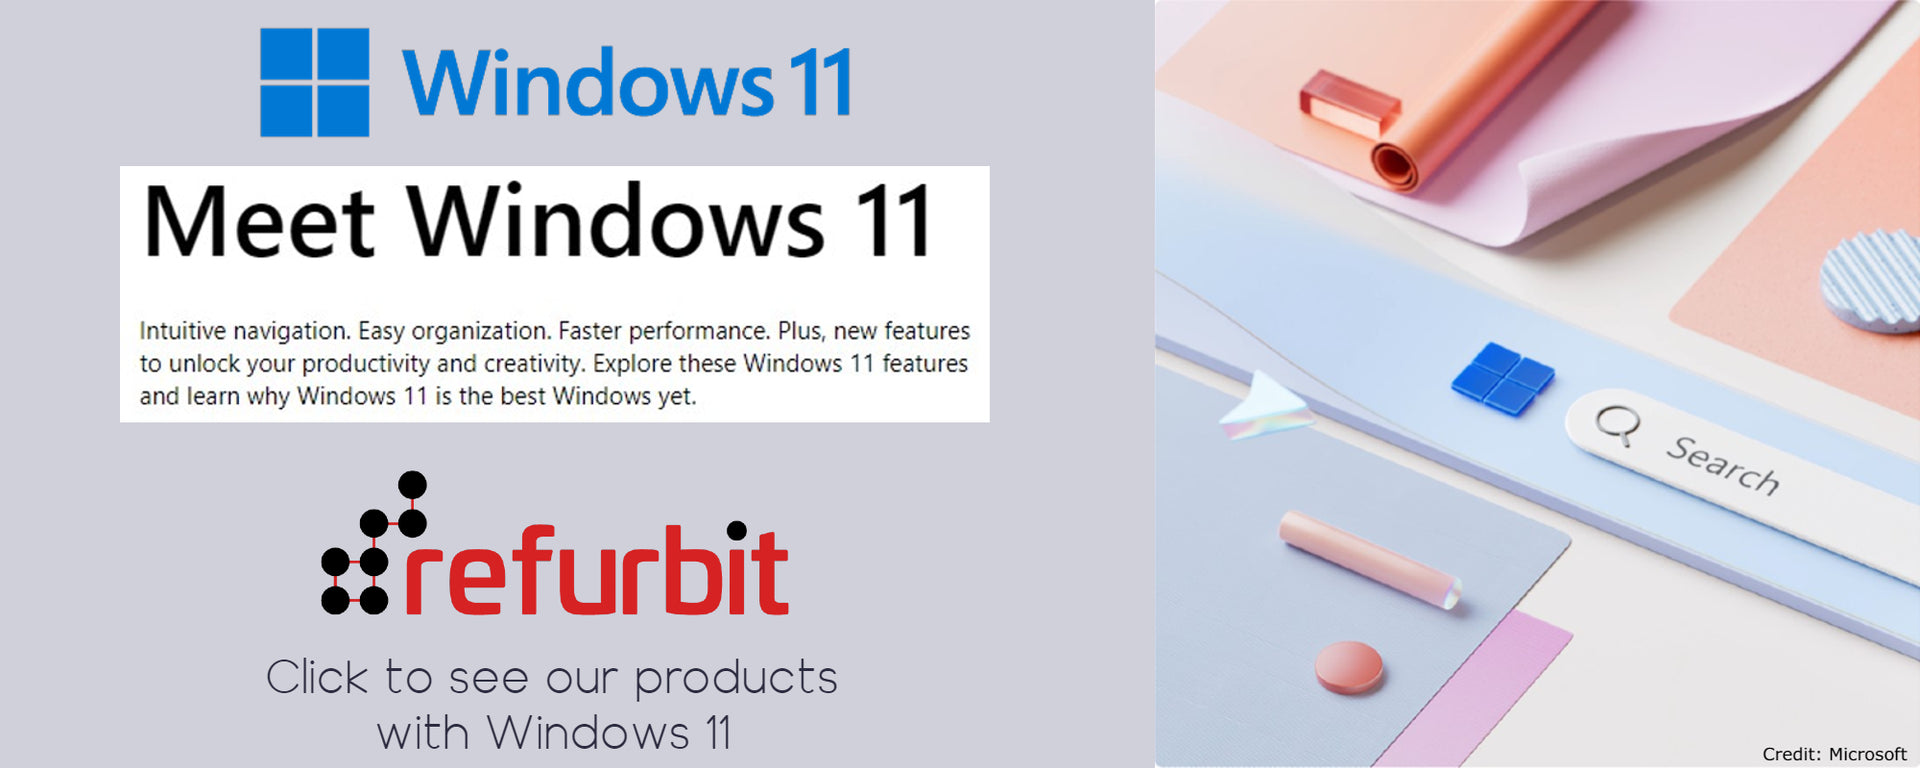 Refurbit sells products with Windows 11 which increases your productivity